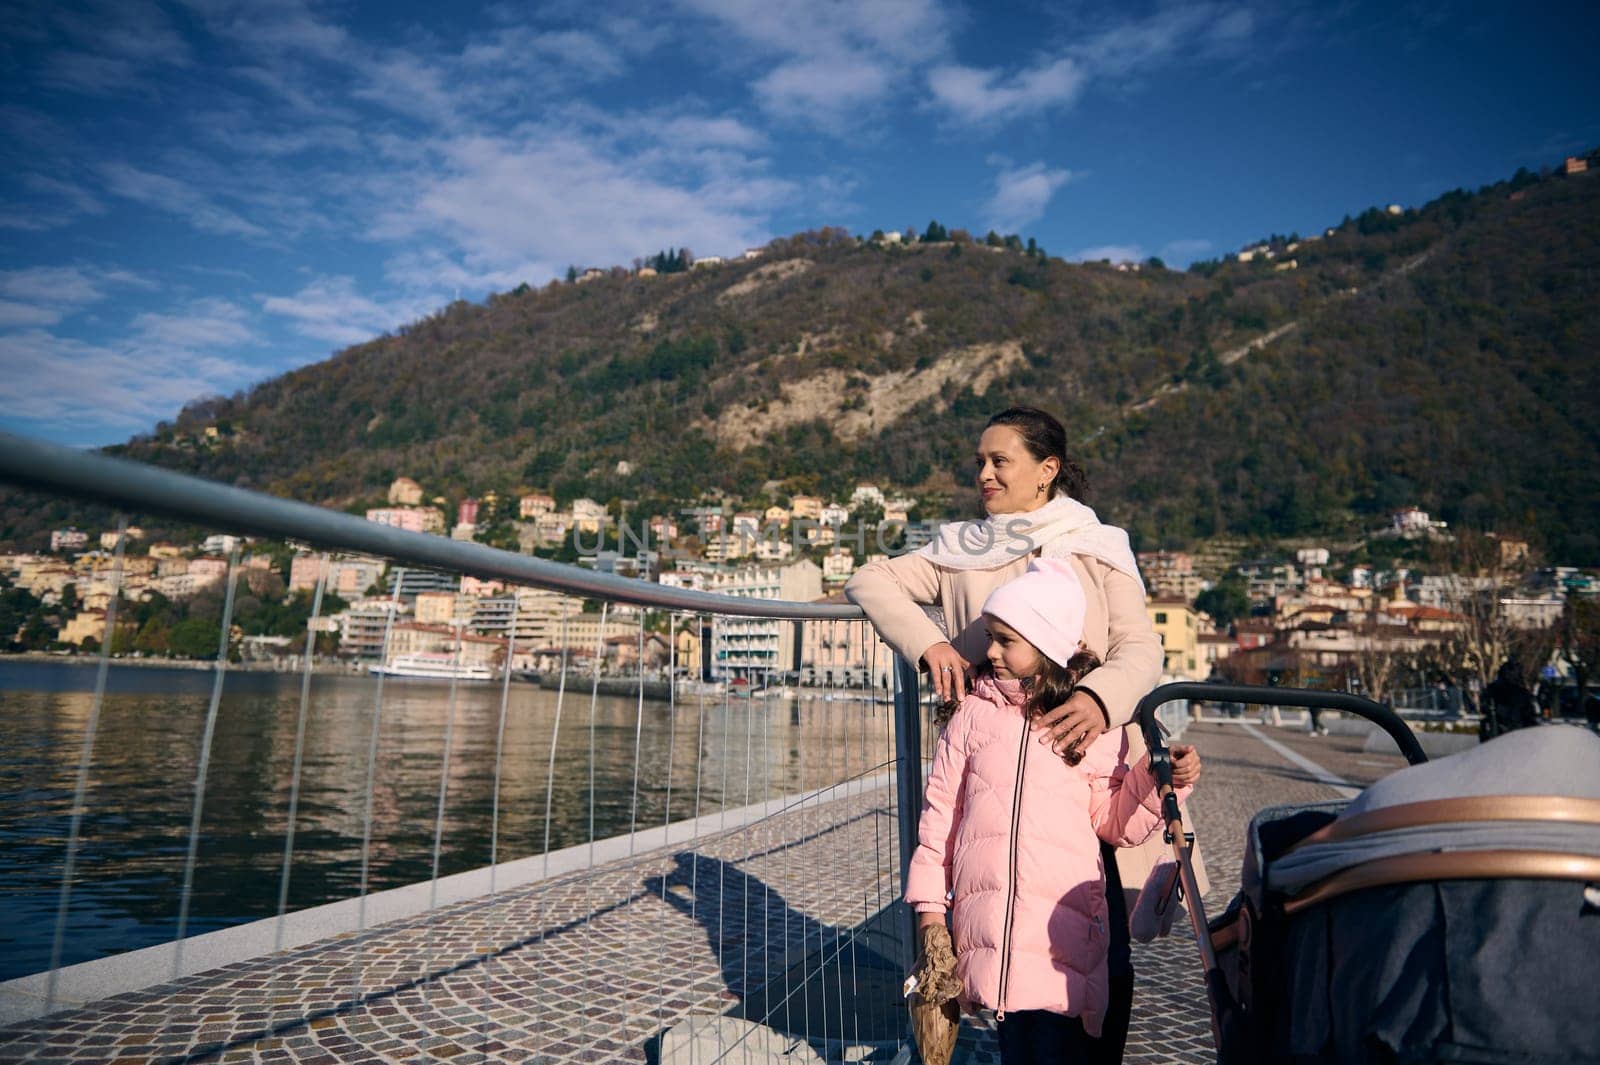 Beautiful smiling woman and her little kid, cute daughter walking on the promenade near the lake of Como. Stylish baby pram in the foreground. Family. Mother and children enjoying family walk outdoors